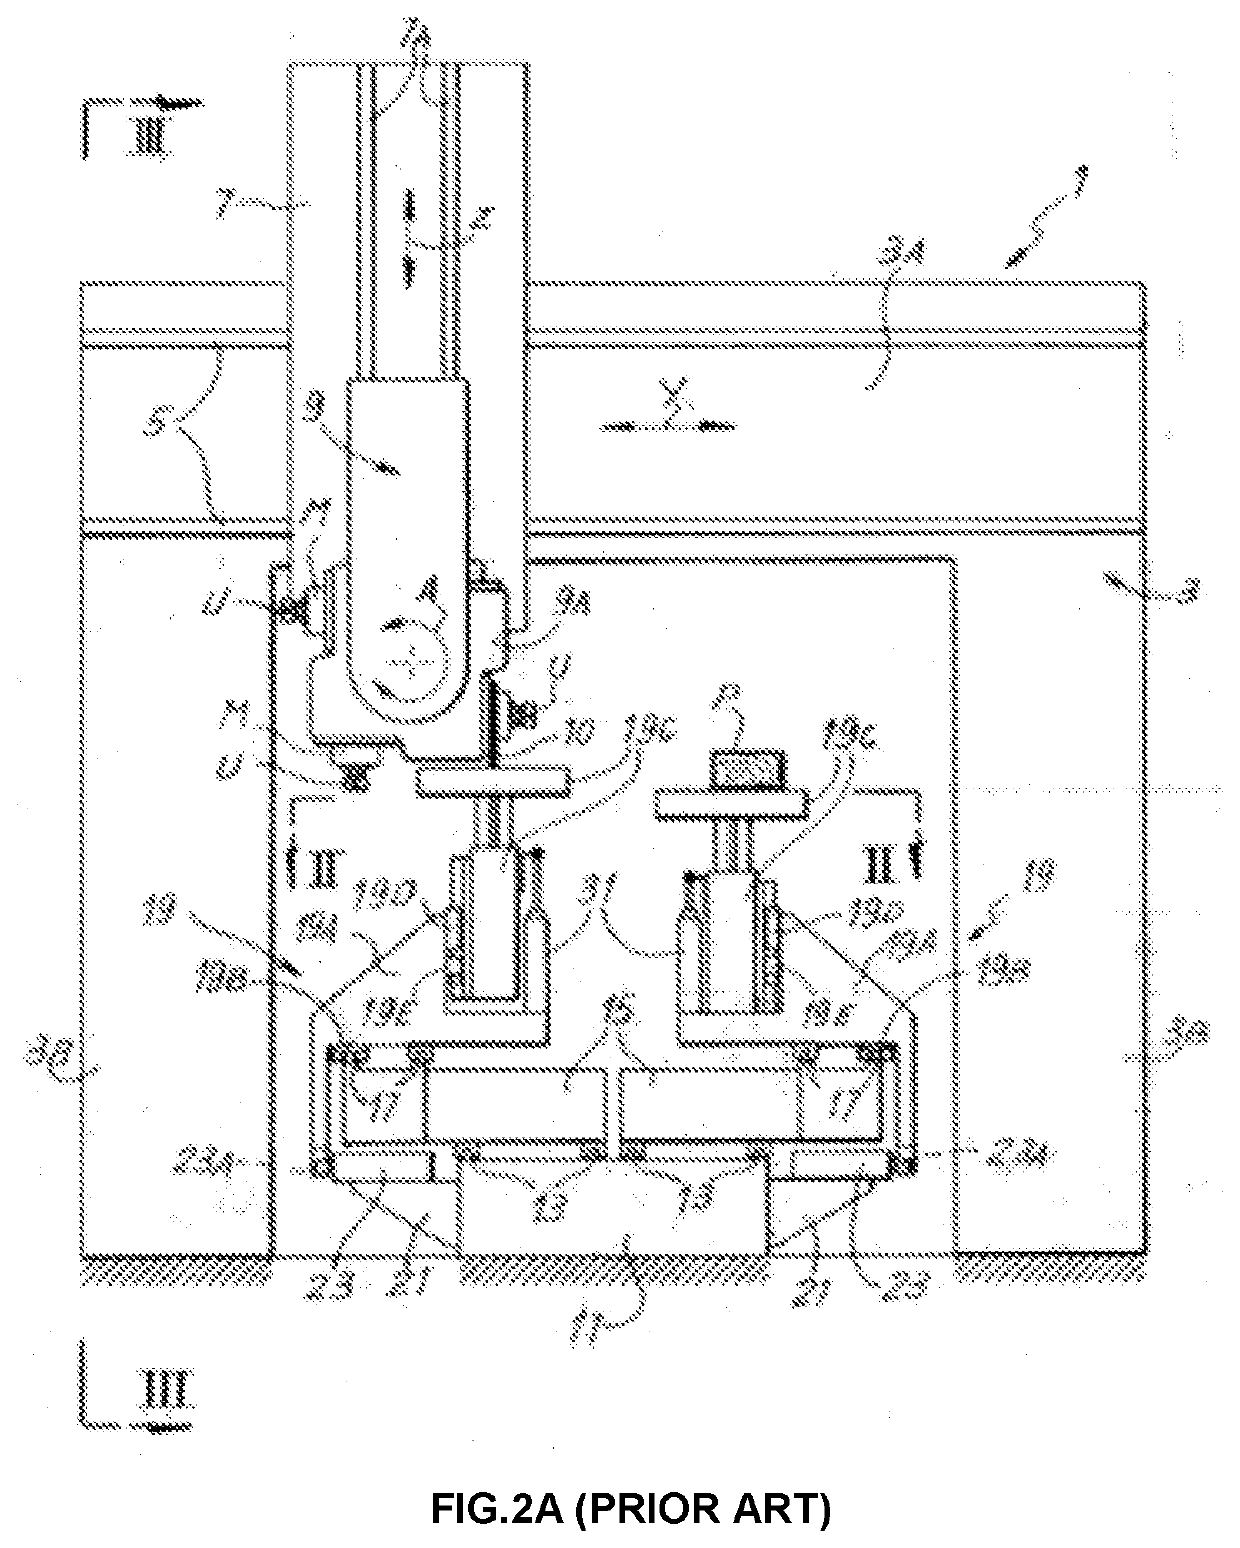 Omni-directional computerized numerical control (CNC) machine tool and method of performing the same